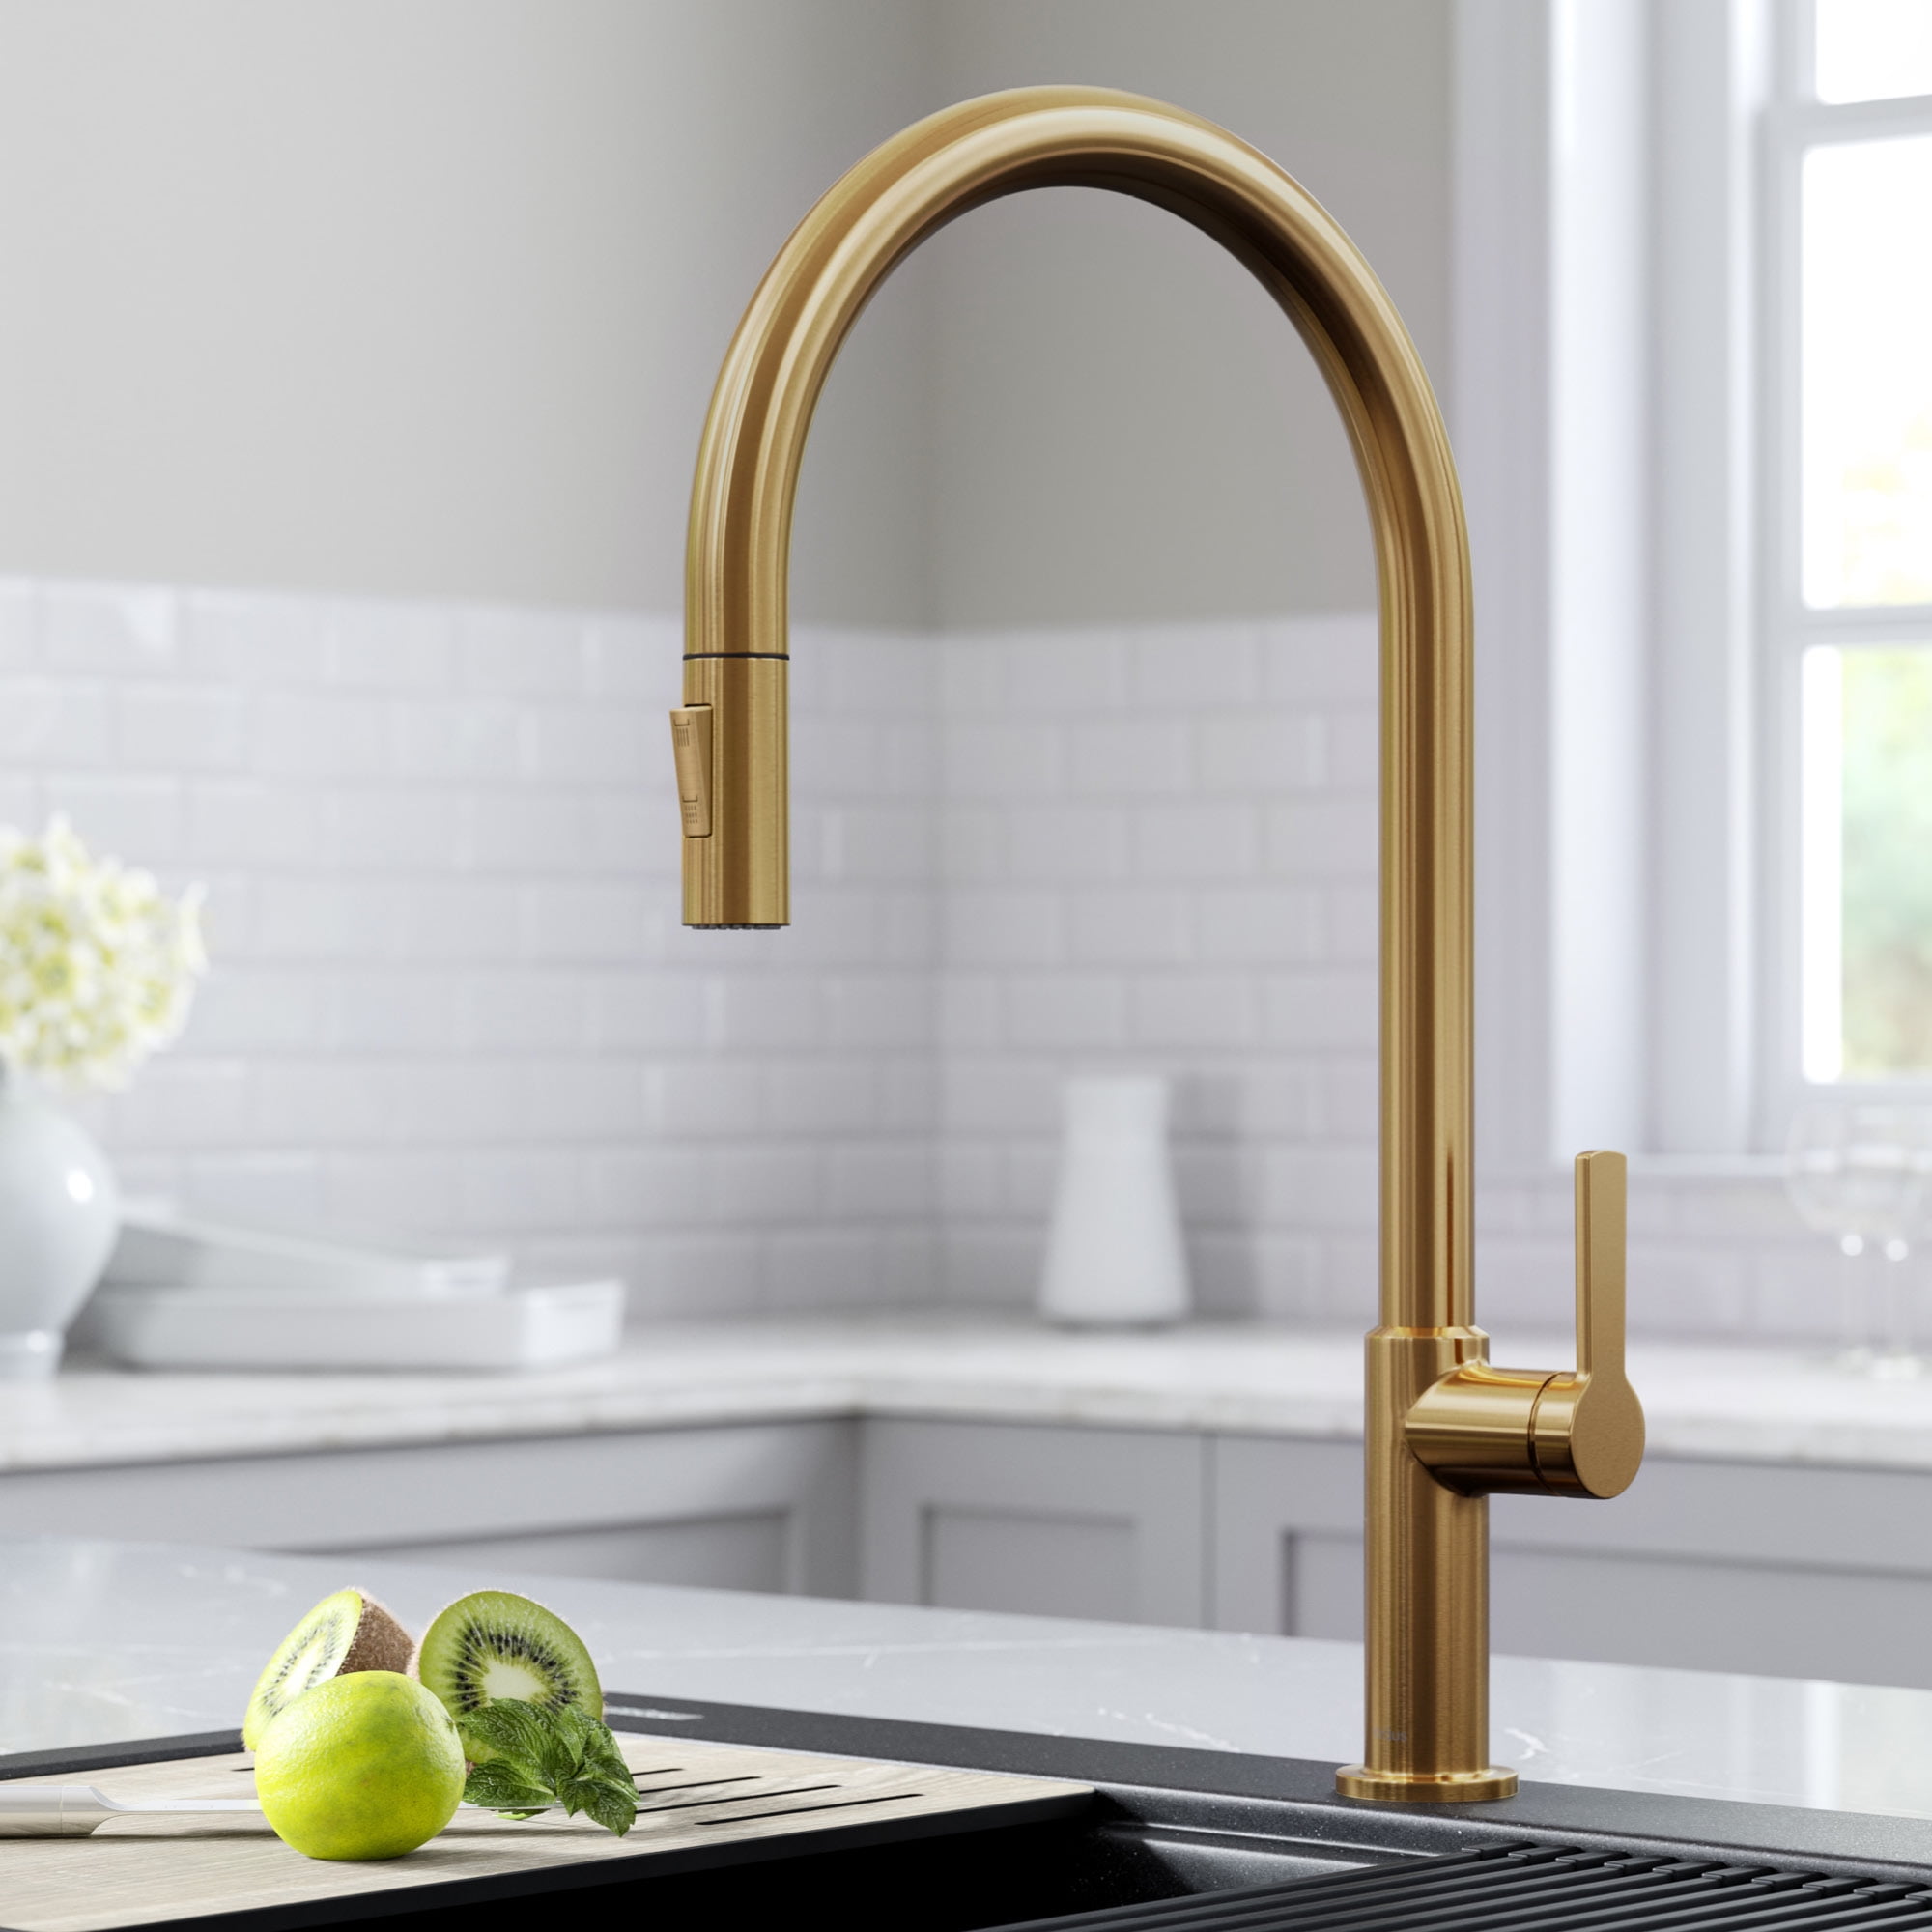 Kraus Oletto HighArc Single Handle PullDown Kitchen Faucet in Brushed